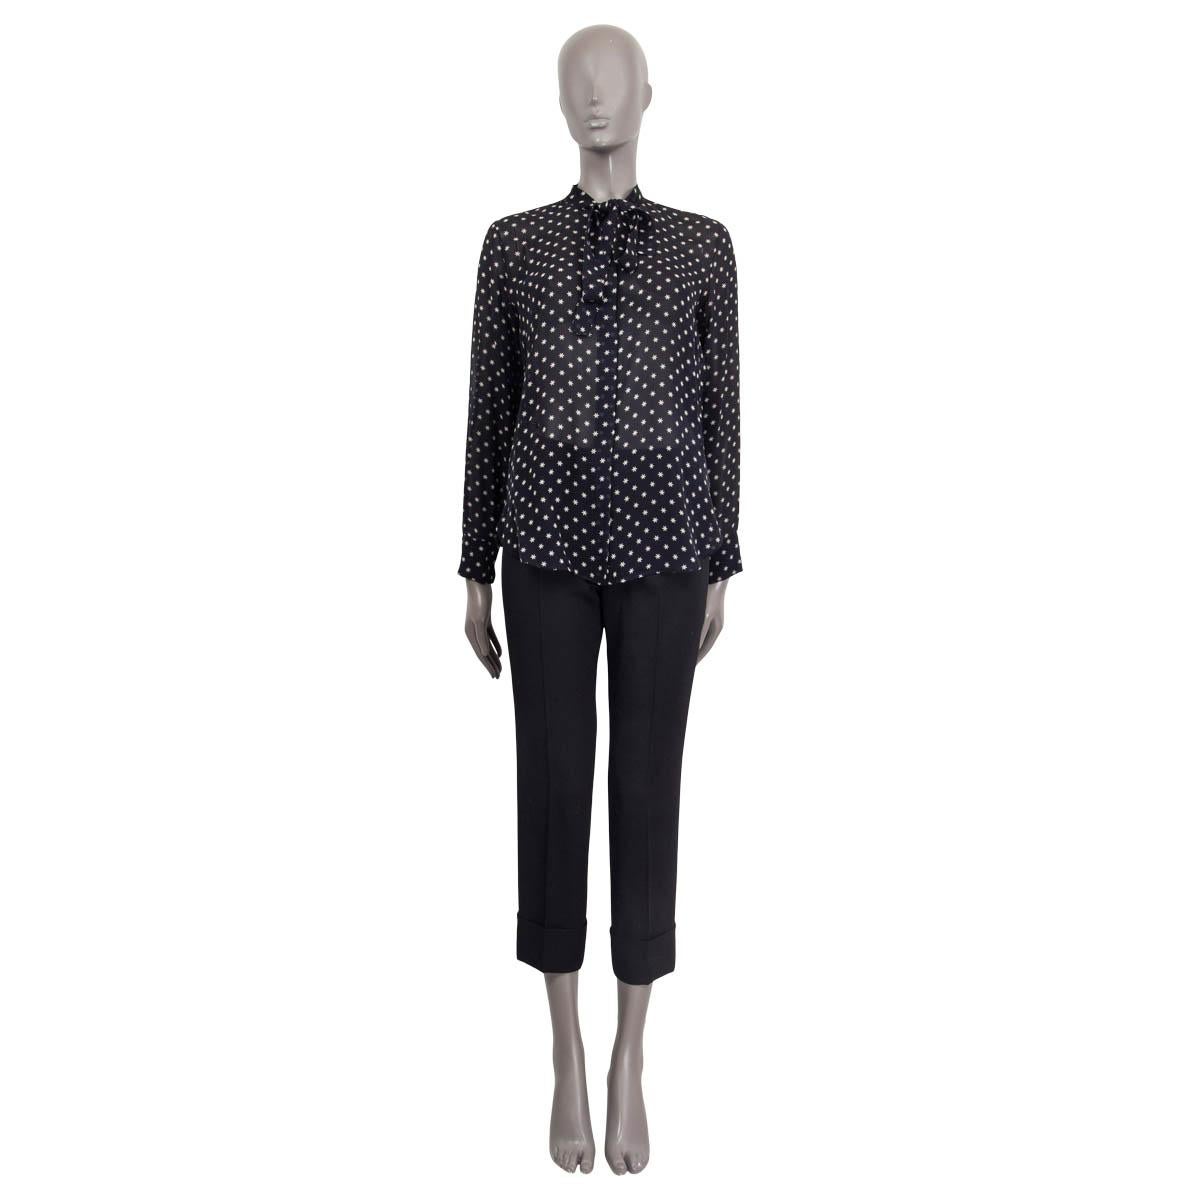 100% authentic Christian Dior star-printed blouse in black and white silk (100%). Features a tie-neck and buttoned cuffs. Opens with buttons on the front. Unlined. Has faint deodorant stains otherwise in excellent condition.

Measurements
Tag